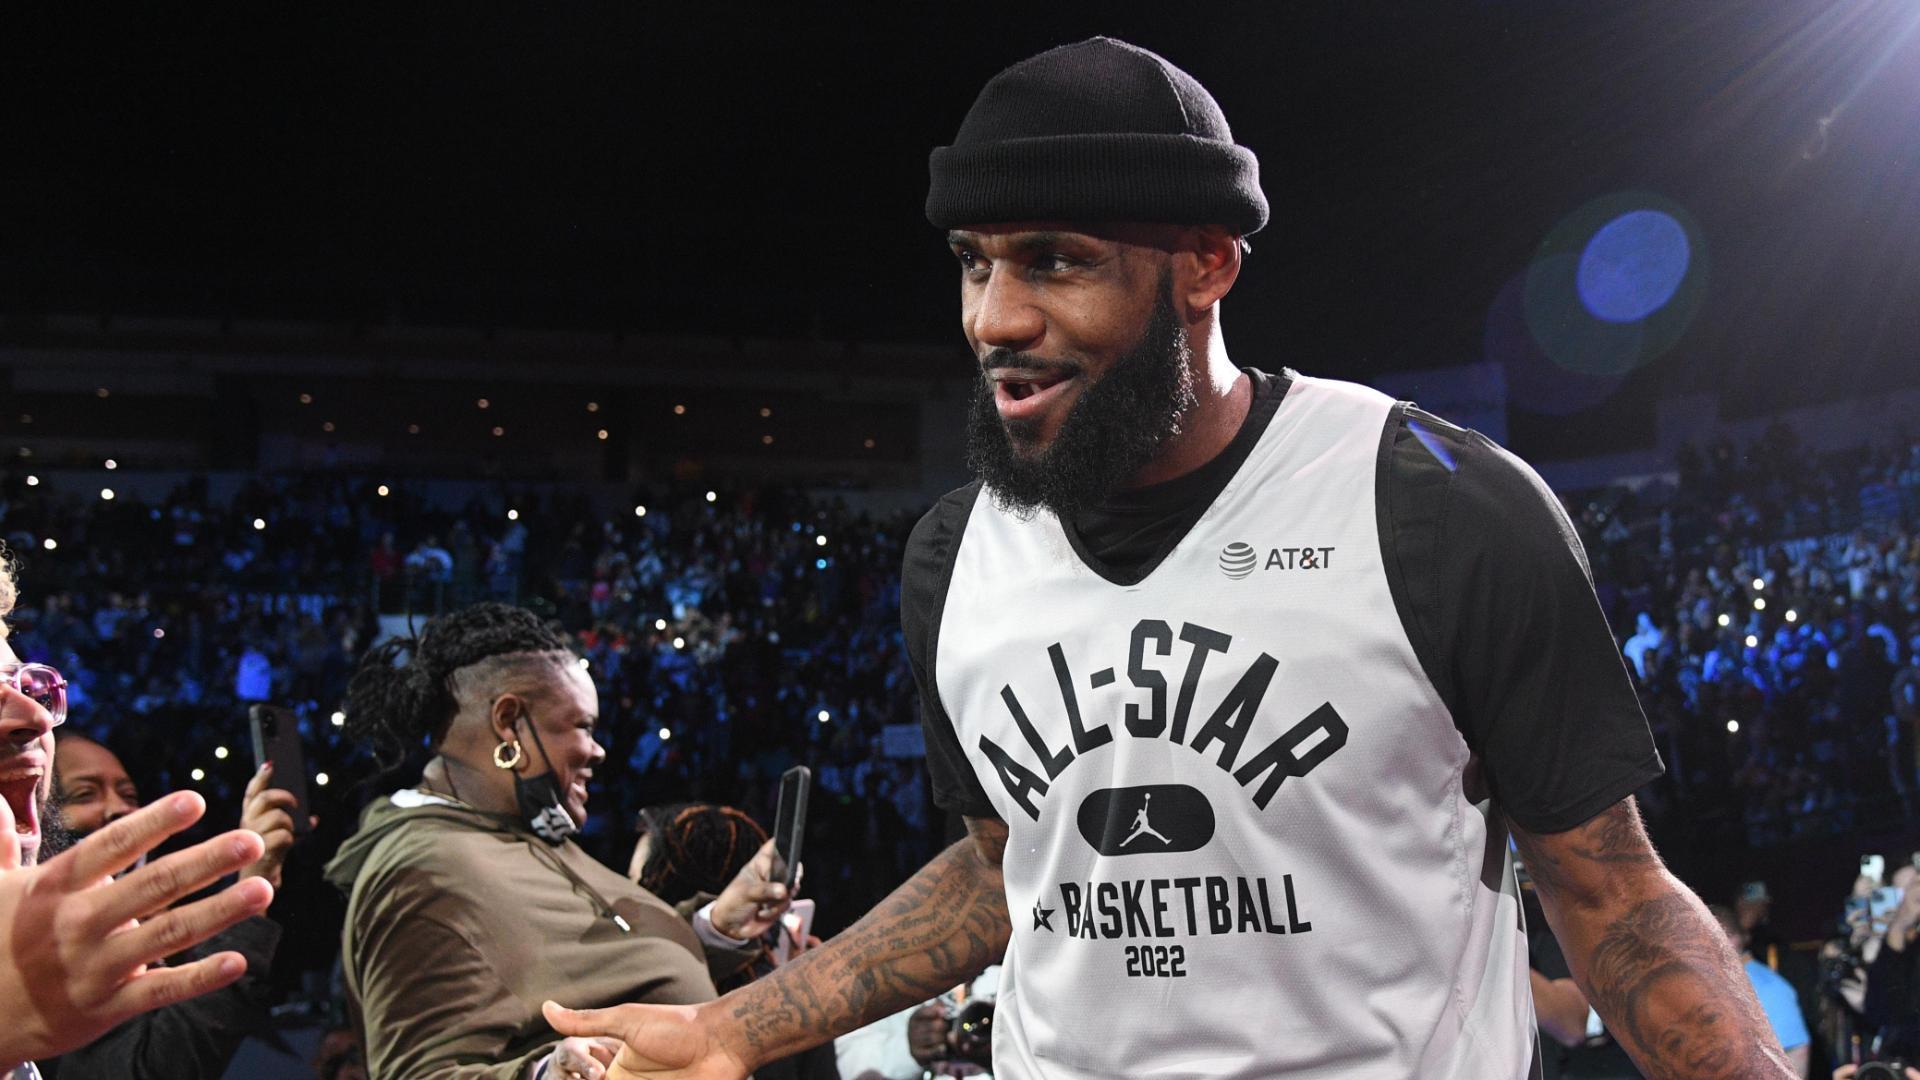 LeBron hears the roars from Cleveland crowd at All-Star practice